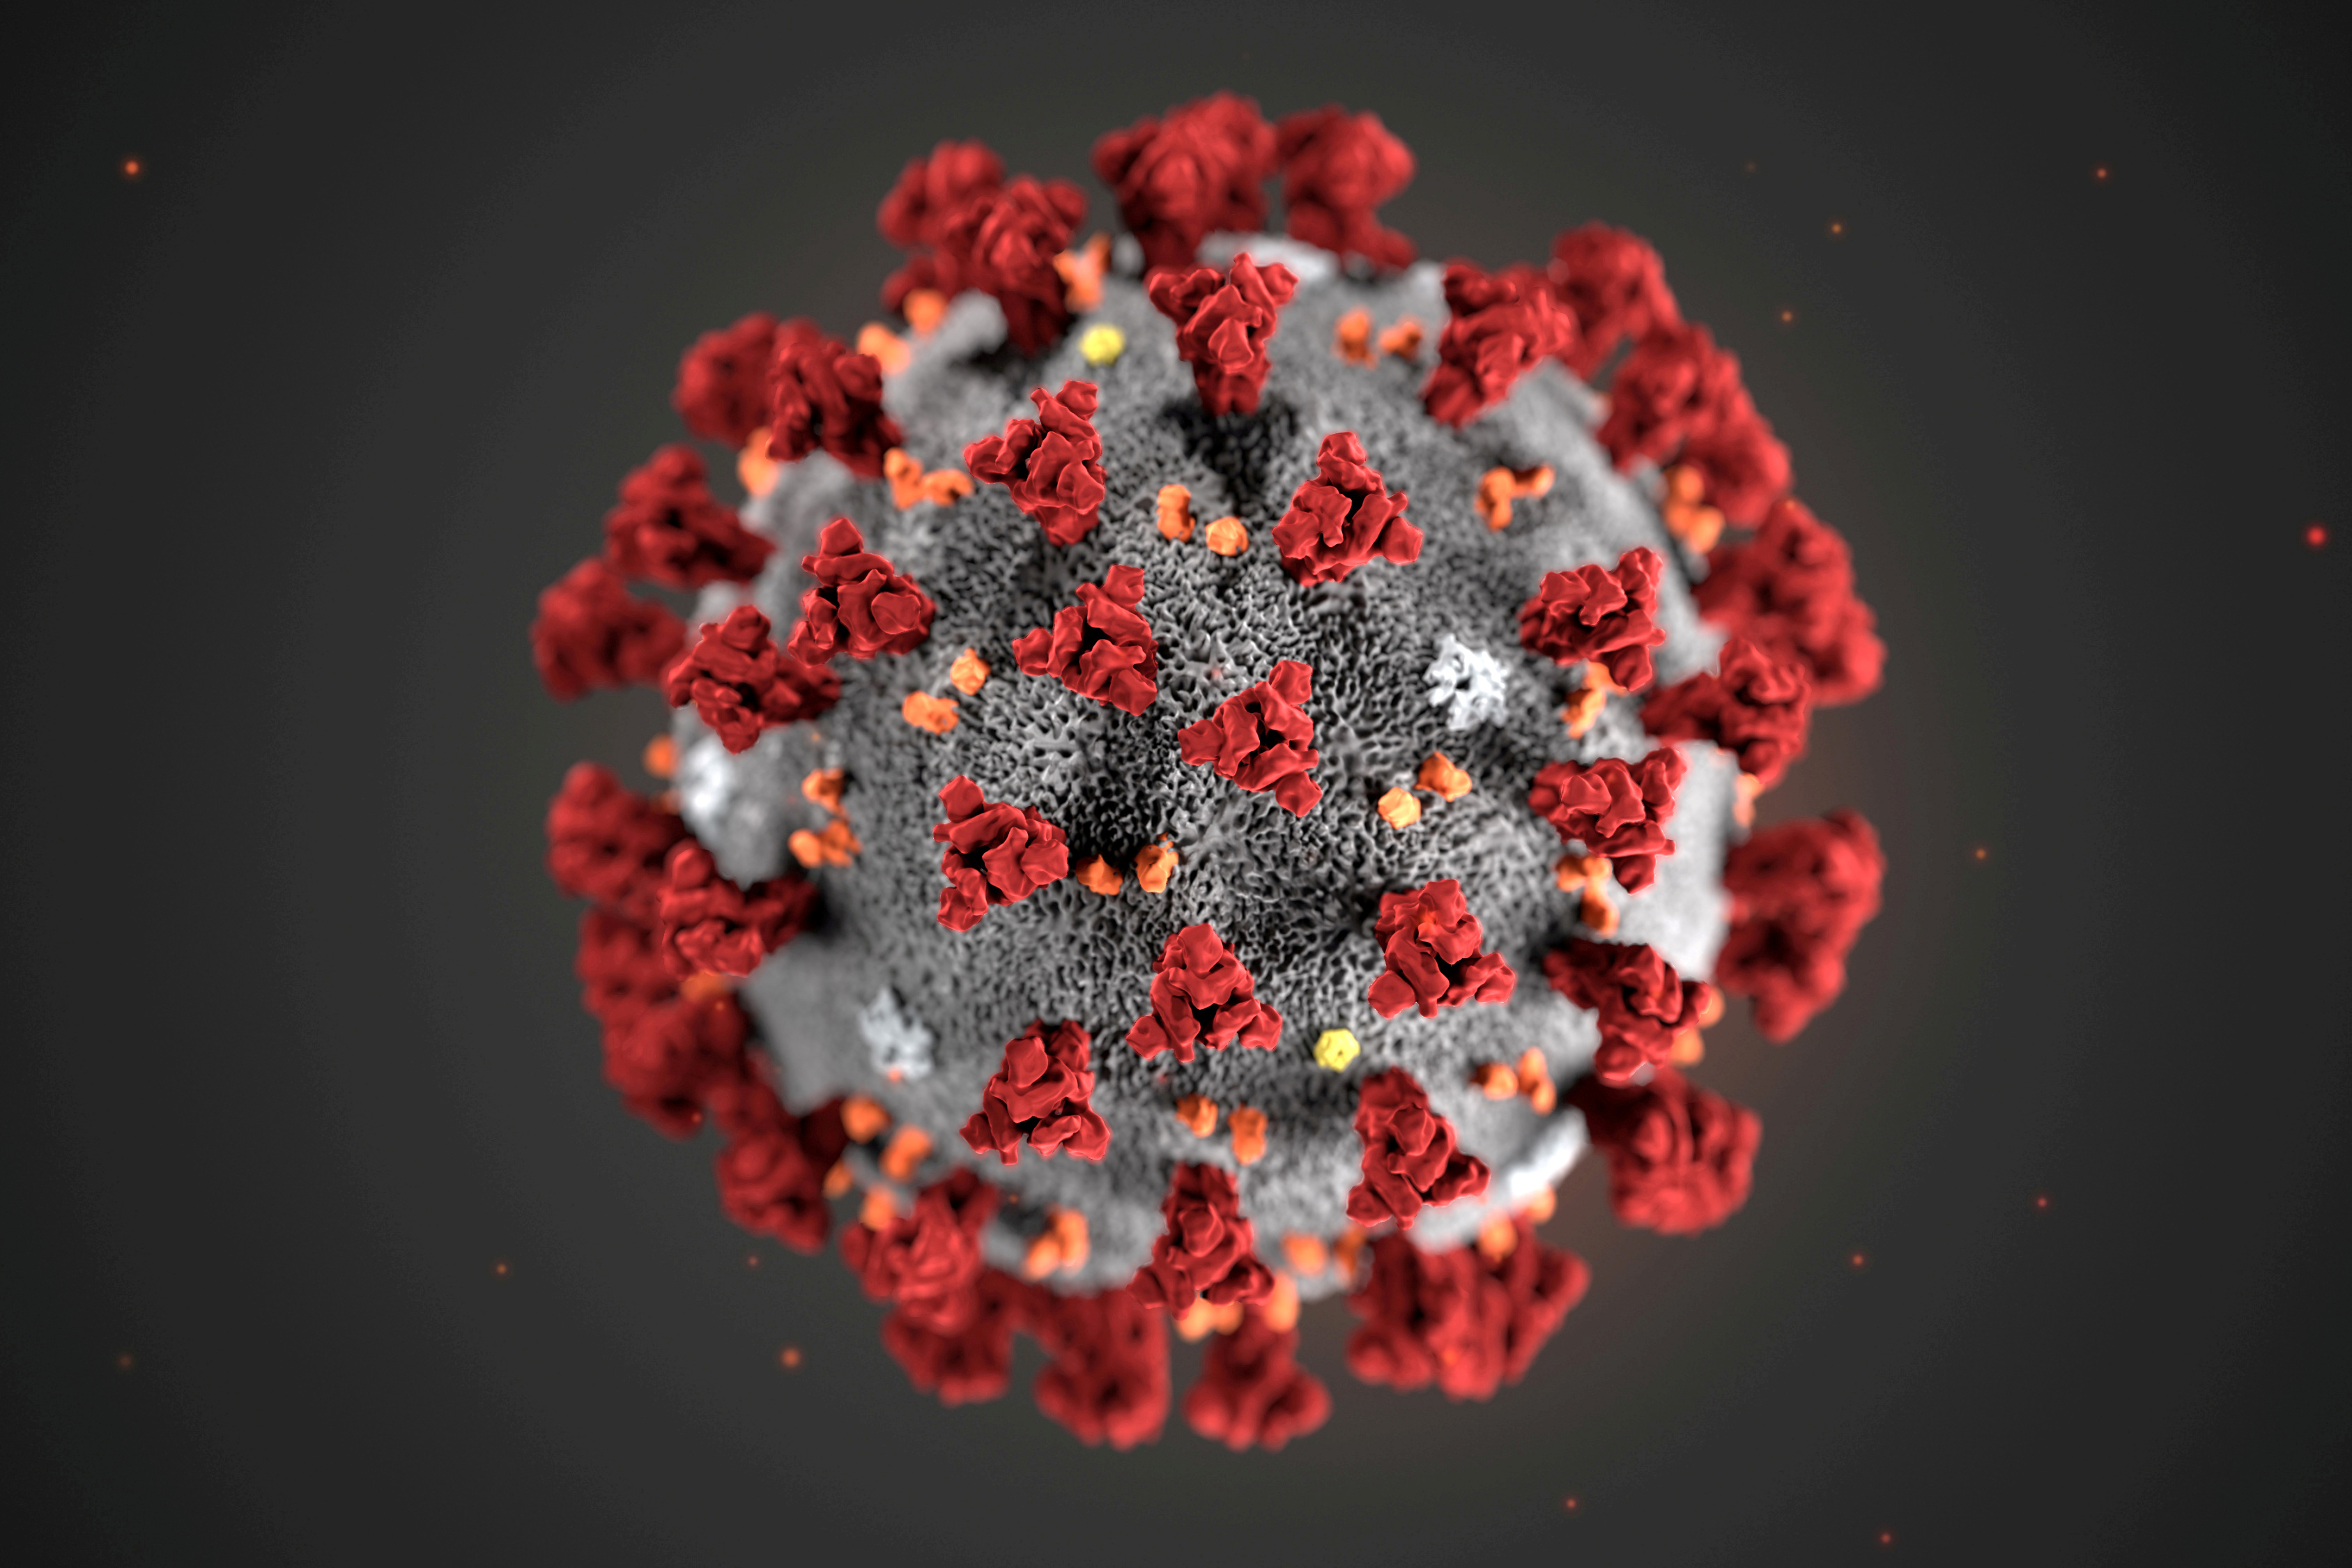 The ultrastructural morphology exhibited by the 2019 Novel Coronavirus (2019-nCoV) is seen in an illustration released by the Centers for Disease Control and Prevention (CDC) in Atlanta, Georgia, U.S. January 29, 2020. Alissa Eckert, MS; Dan Higgins, MAM/CDC/Handout via REUTERS./File Photo